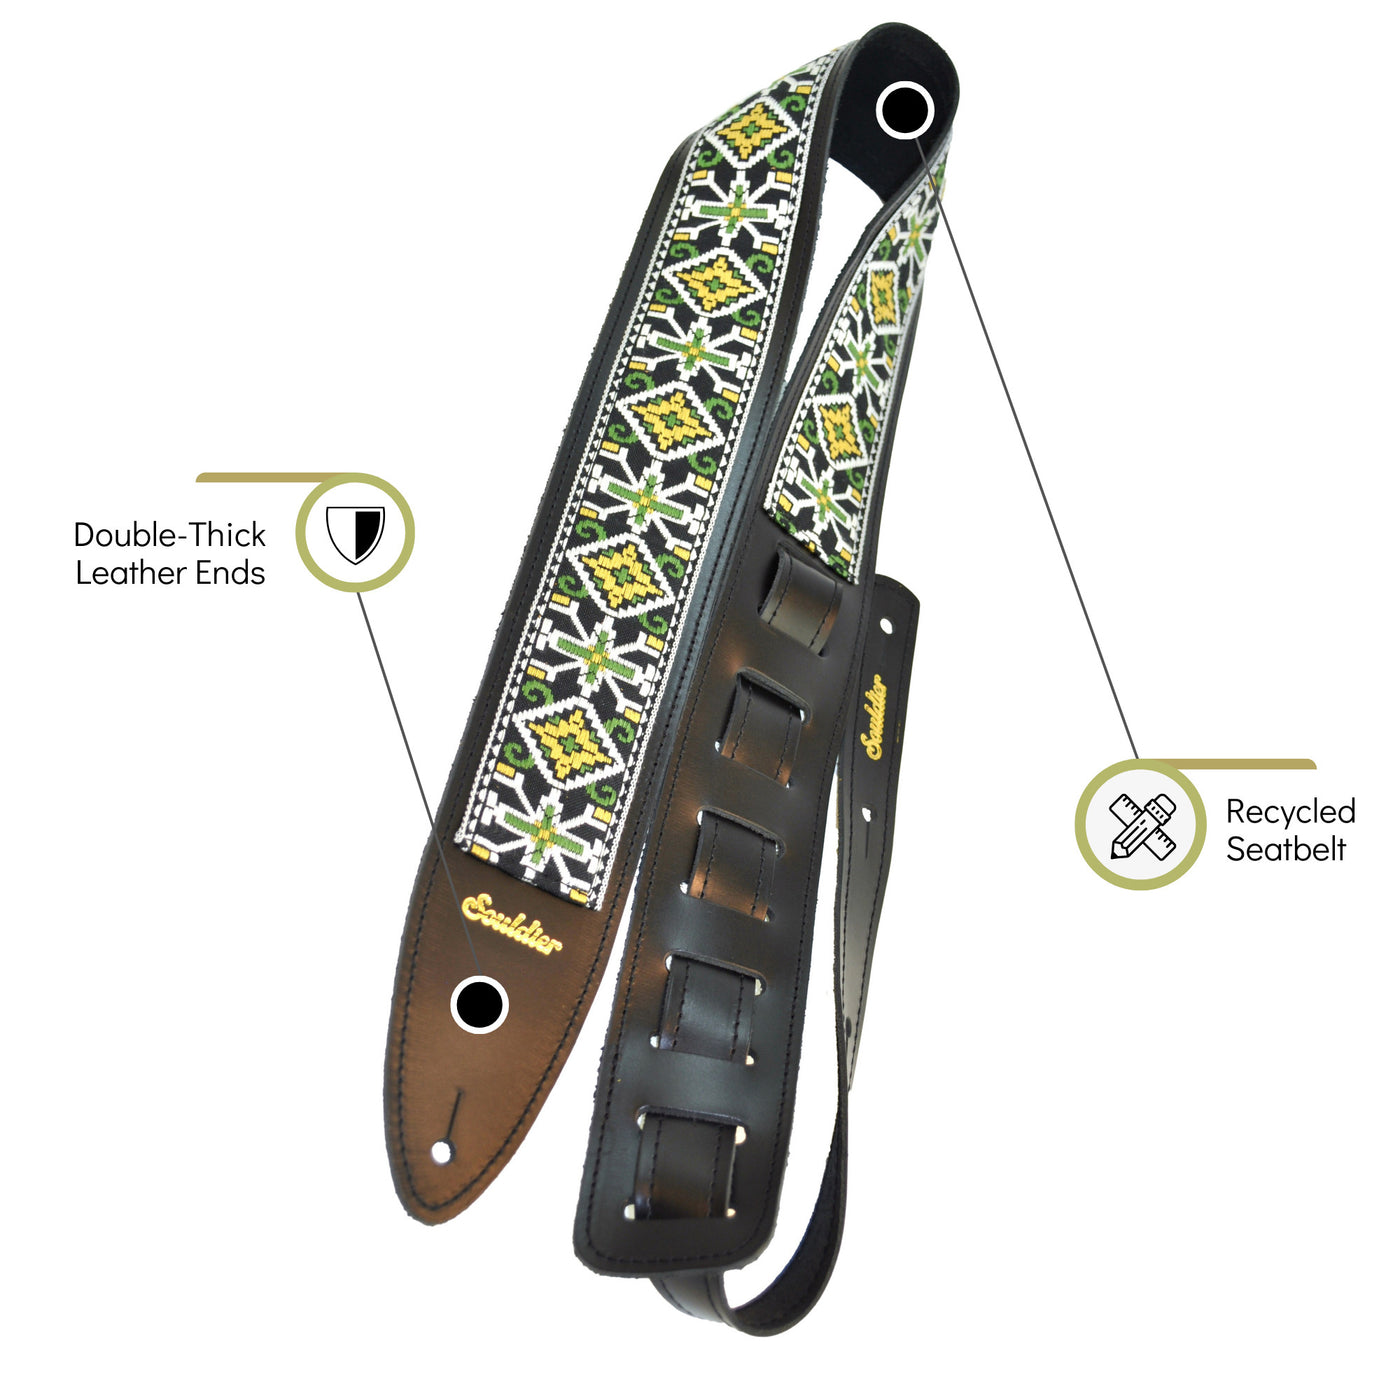 Souldier TGS1318BK01BK - Handmade Souldier Fabric Torpedo Strap for Bass, Electric, or Acoustic Guitar, Adjustable Length from 42.5" to 55" Made in the USA, Gold